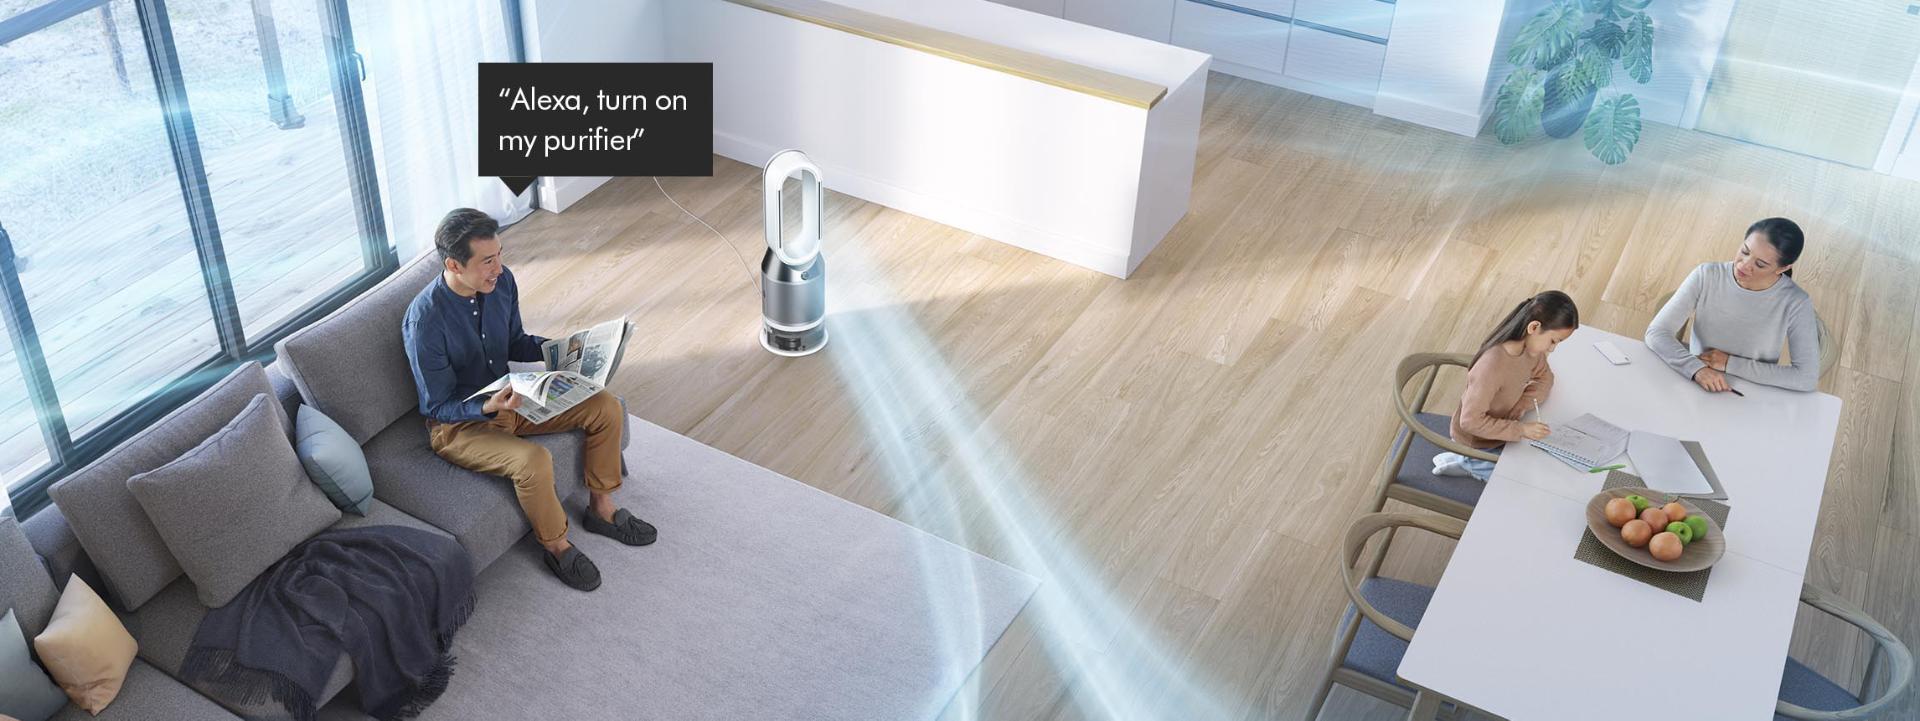 Man on a sofa asking Dyson purifier to purify a room.